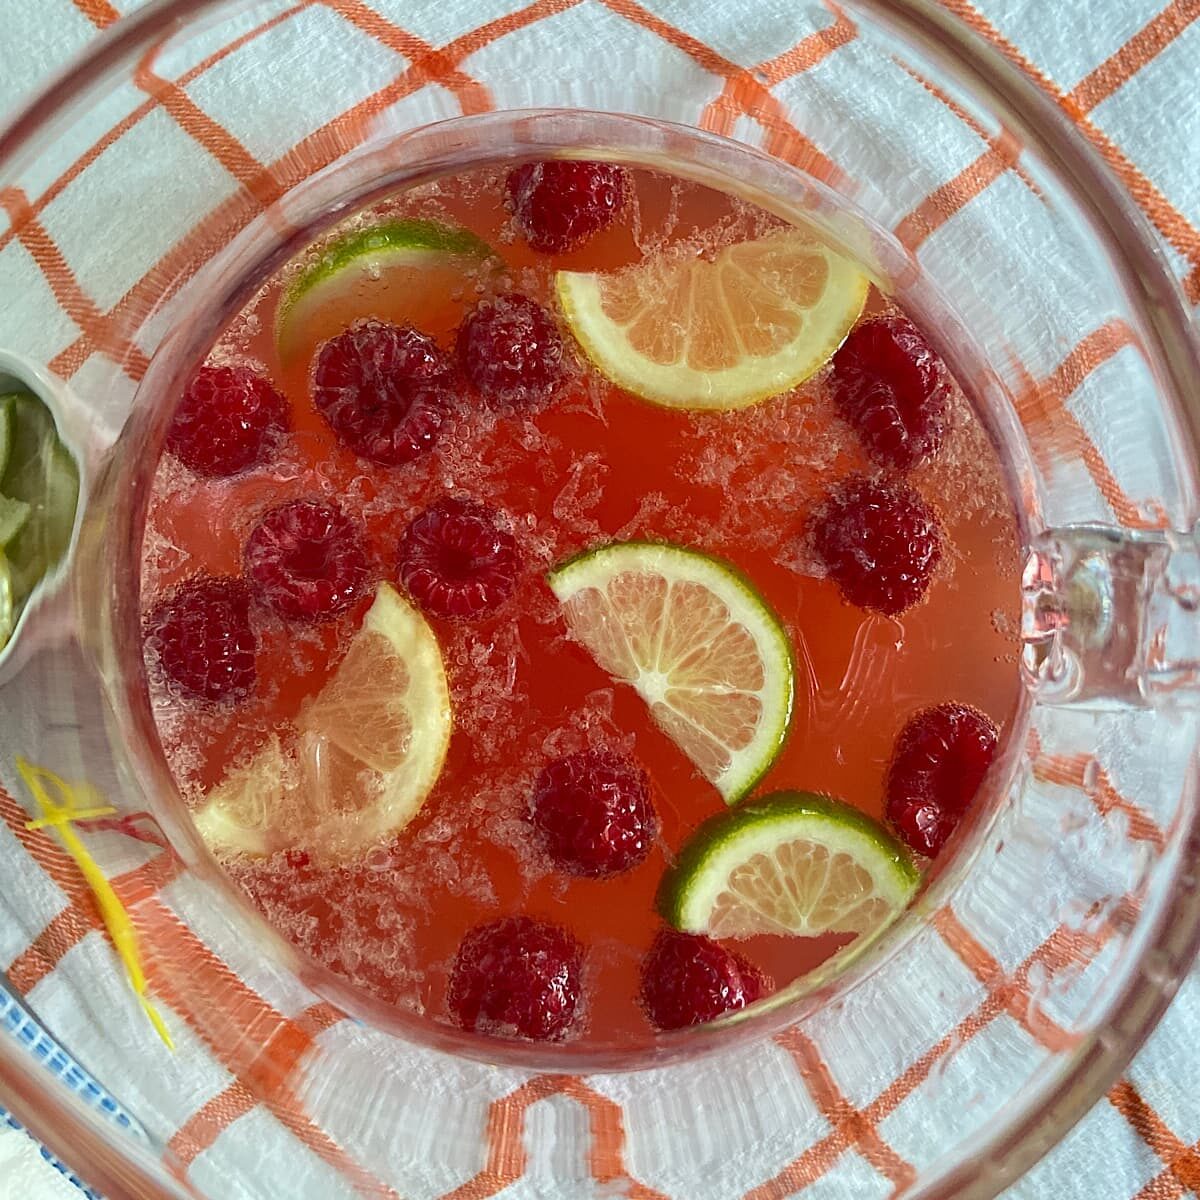 Top view of pitcher with cherry lemonade mocktail with lemon slices and raspberries.